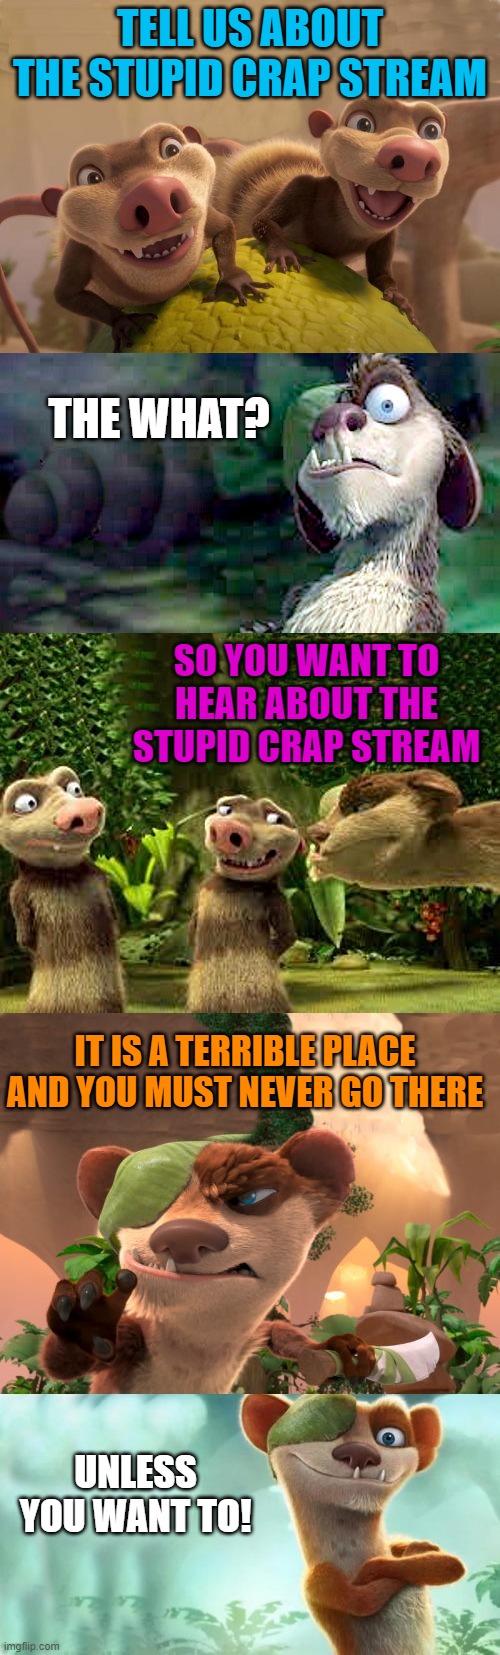 TELL US ABOUT THE STUPID CRAP STREAM; THE WHAT? SO YOU WANT TO HEAR ABOUT THE STUPID CRAP STREAM; IT IS A TERRIBLE PLACE AND YOU MUST NEVER GO THERE; UNLESS YOU WANT TO! | image tagged in buck and crash and eddie | made w/ Imgflip meme maker